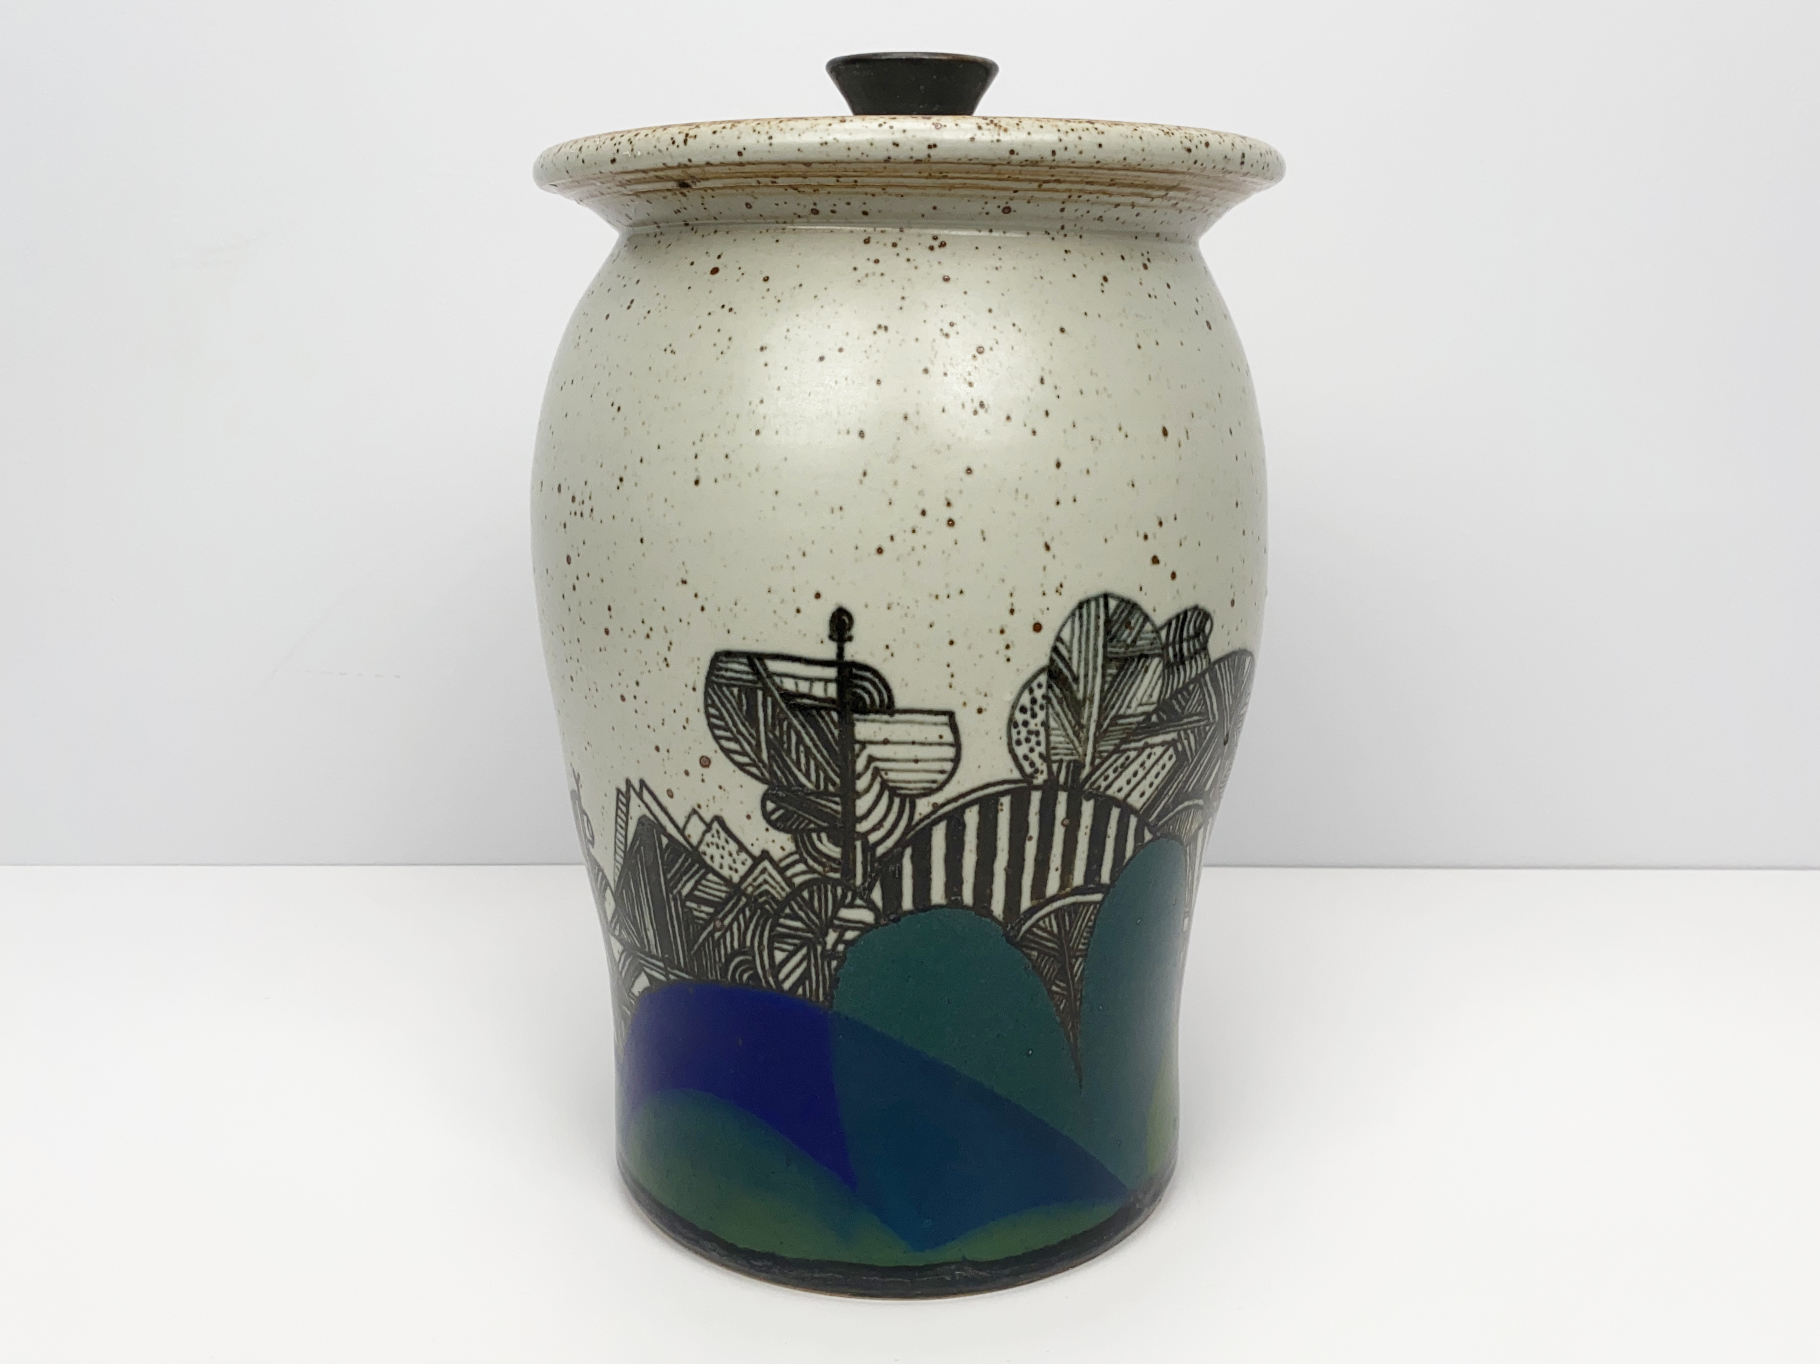 Large Pot, Ceramic, Stoneware, Unique Piece, abstract Landscape Painting, glazed, by Wilhelm & Elly Kuch, ca. 1995